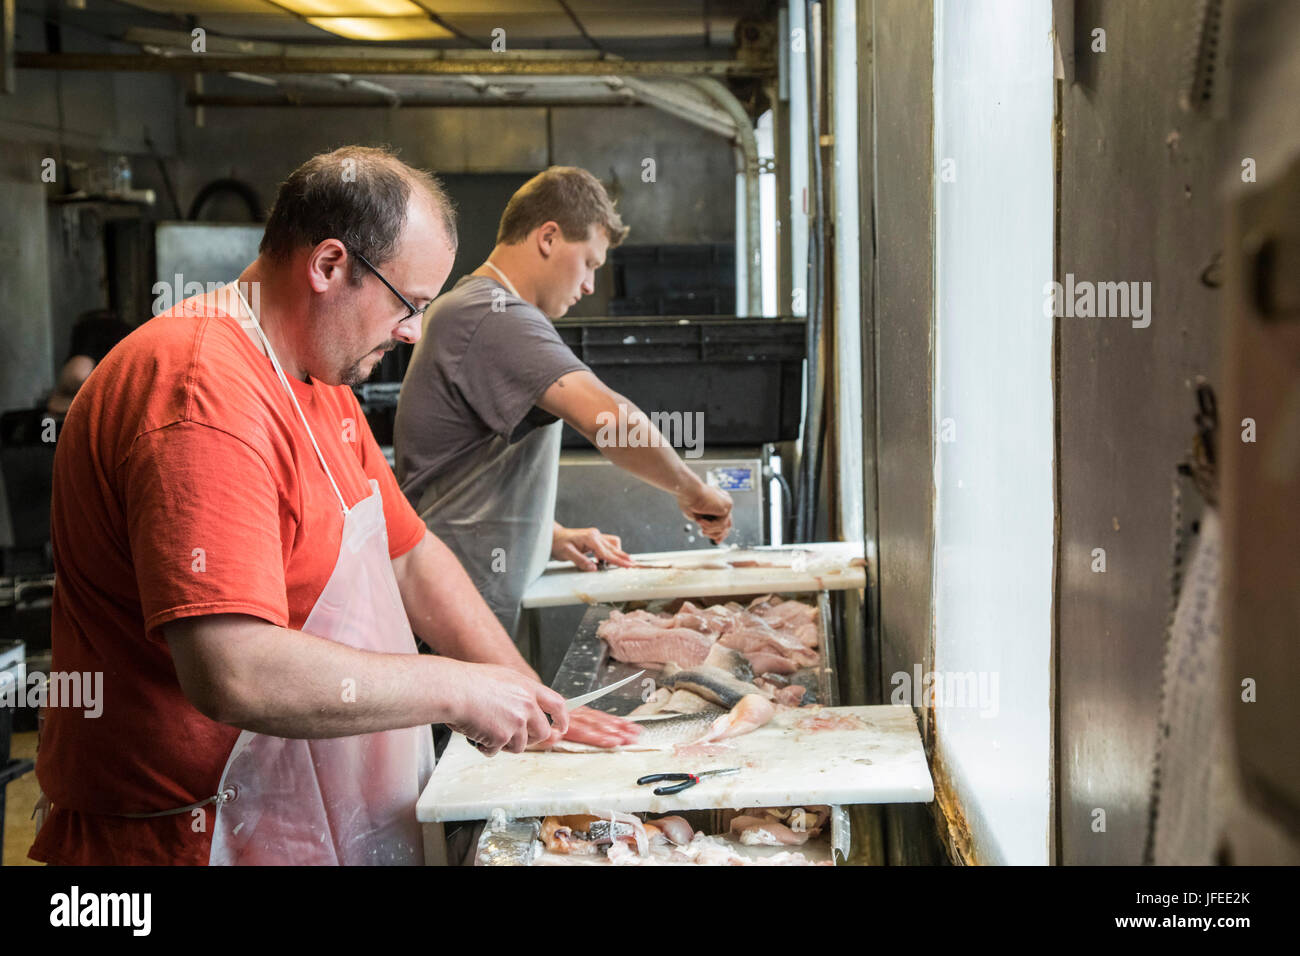 Charlevoix, Michigan - Workers clean and fillet whitefish at the John Cross Fish Market. The fish were caught in Lake Michigan. Stock Photo